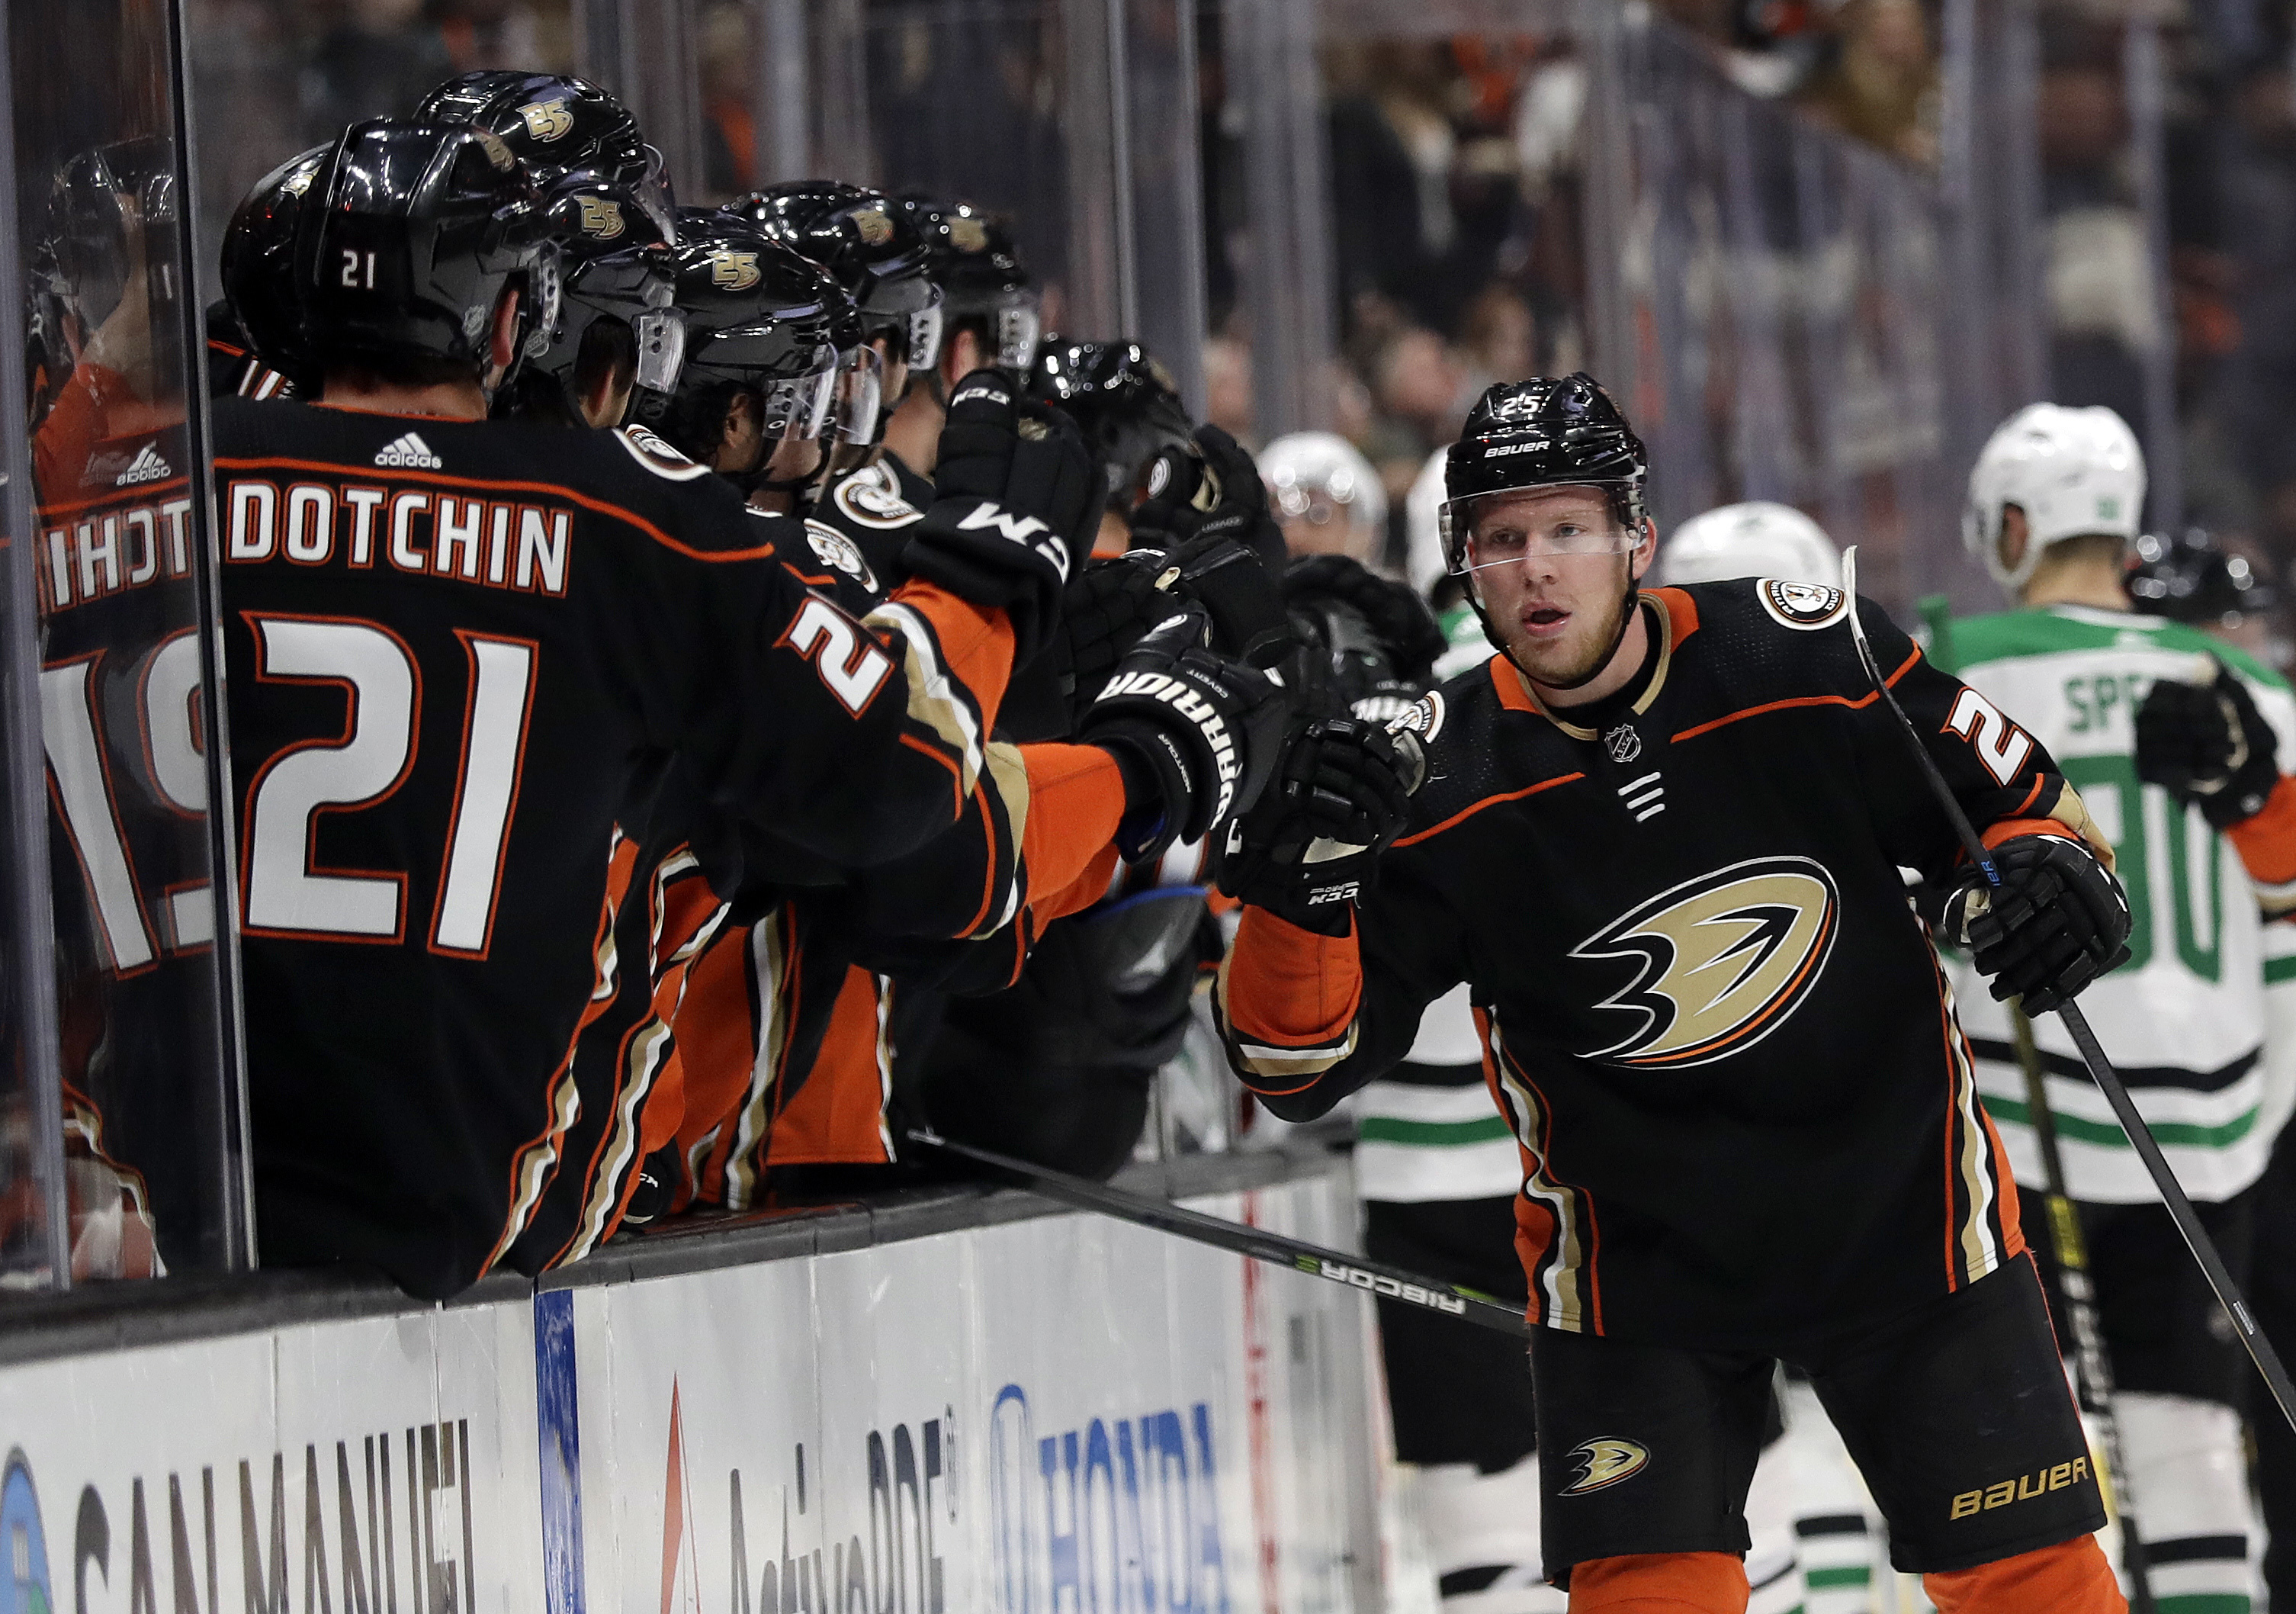 Kase gets 1st NHL hat trick as Ducks rally past Stars 6-3